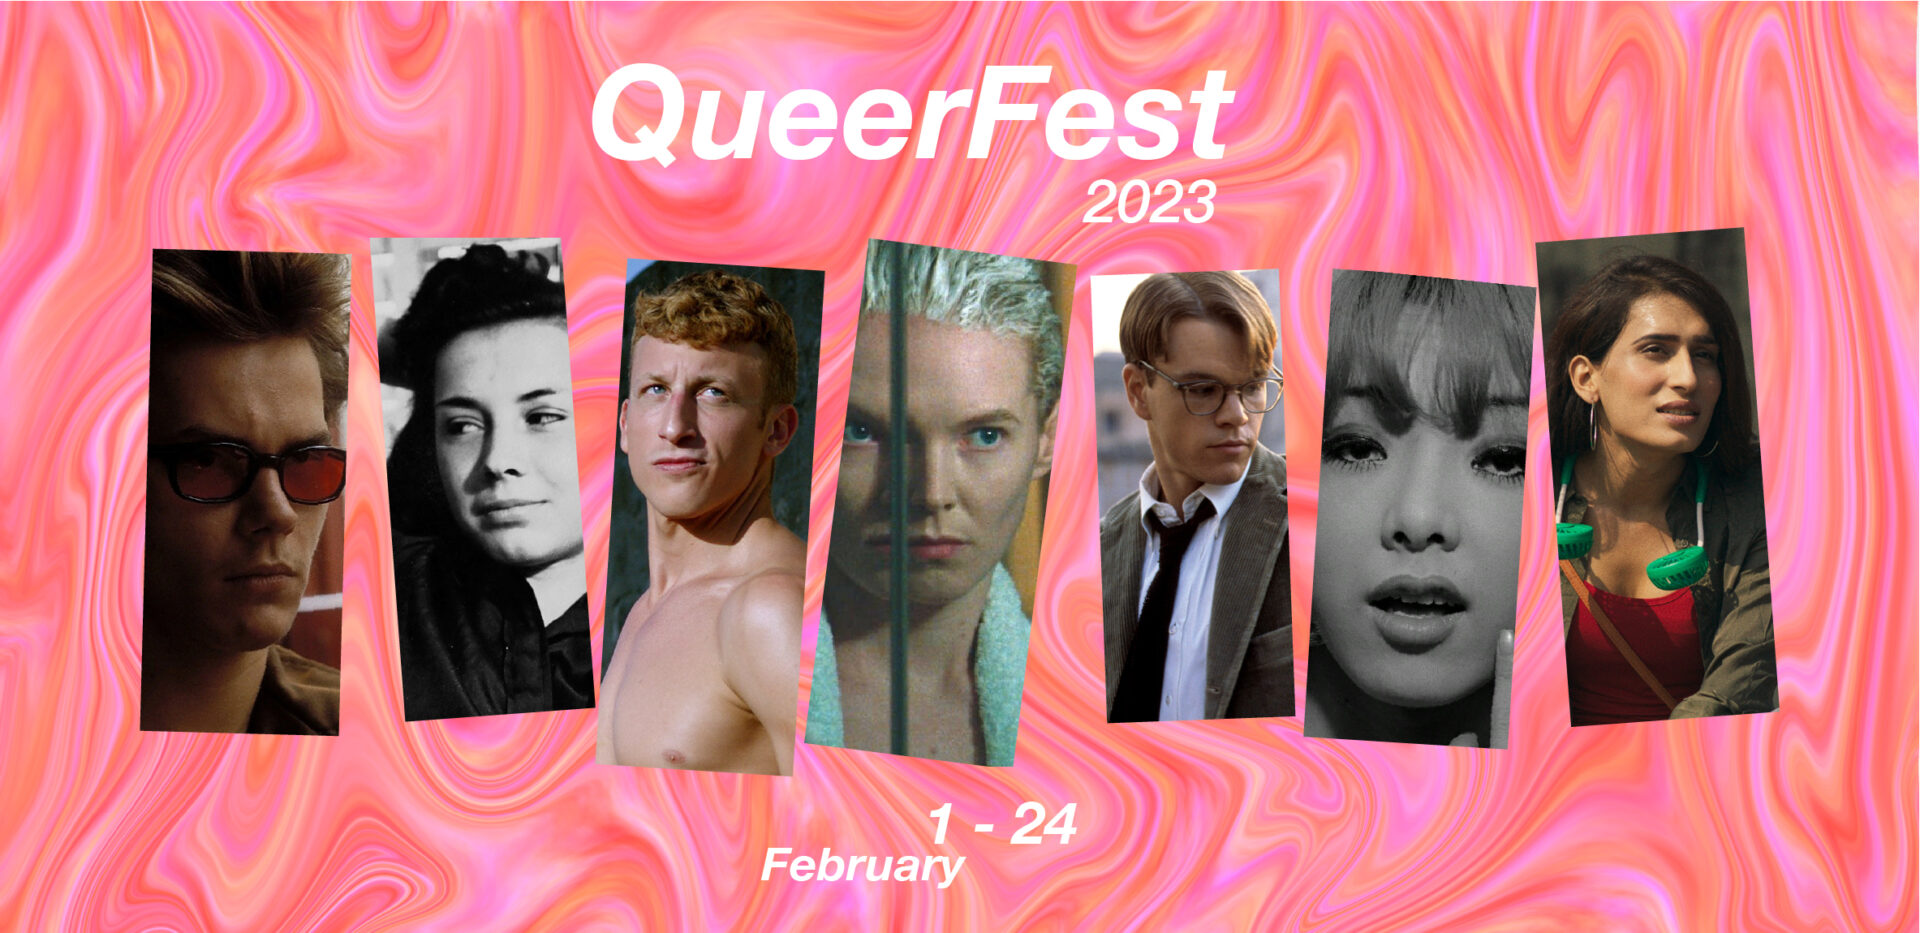 Classic and contemporary films exploring queer identities and experiences